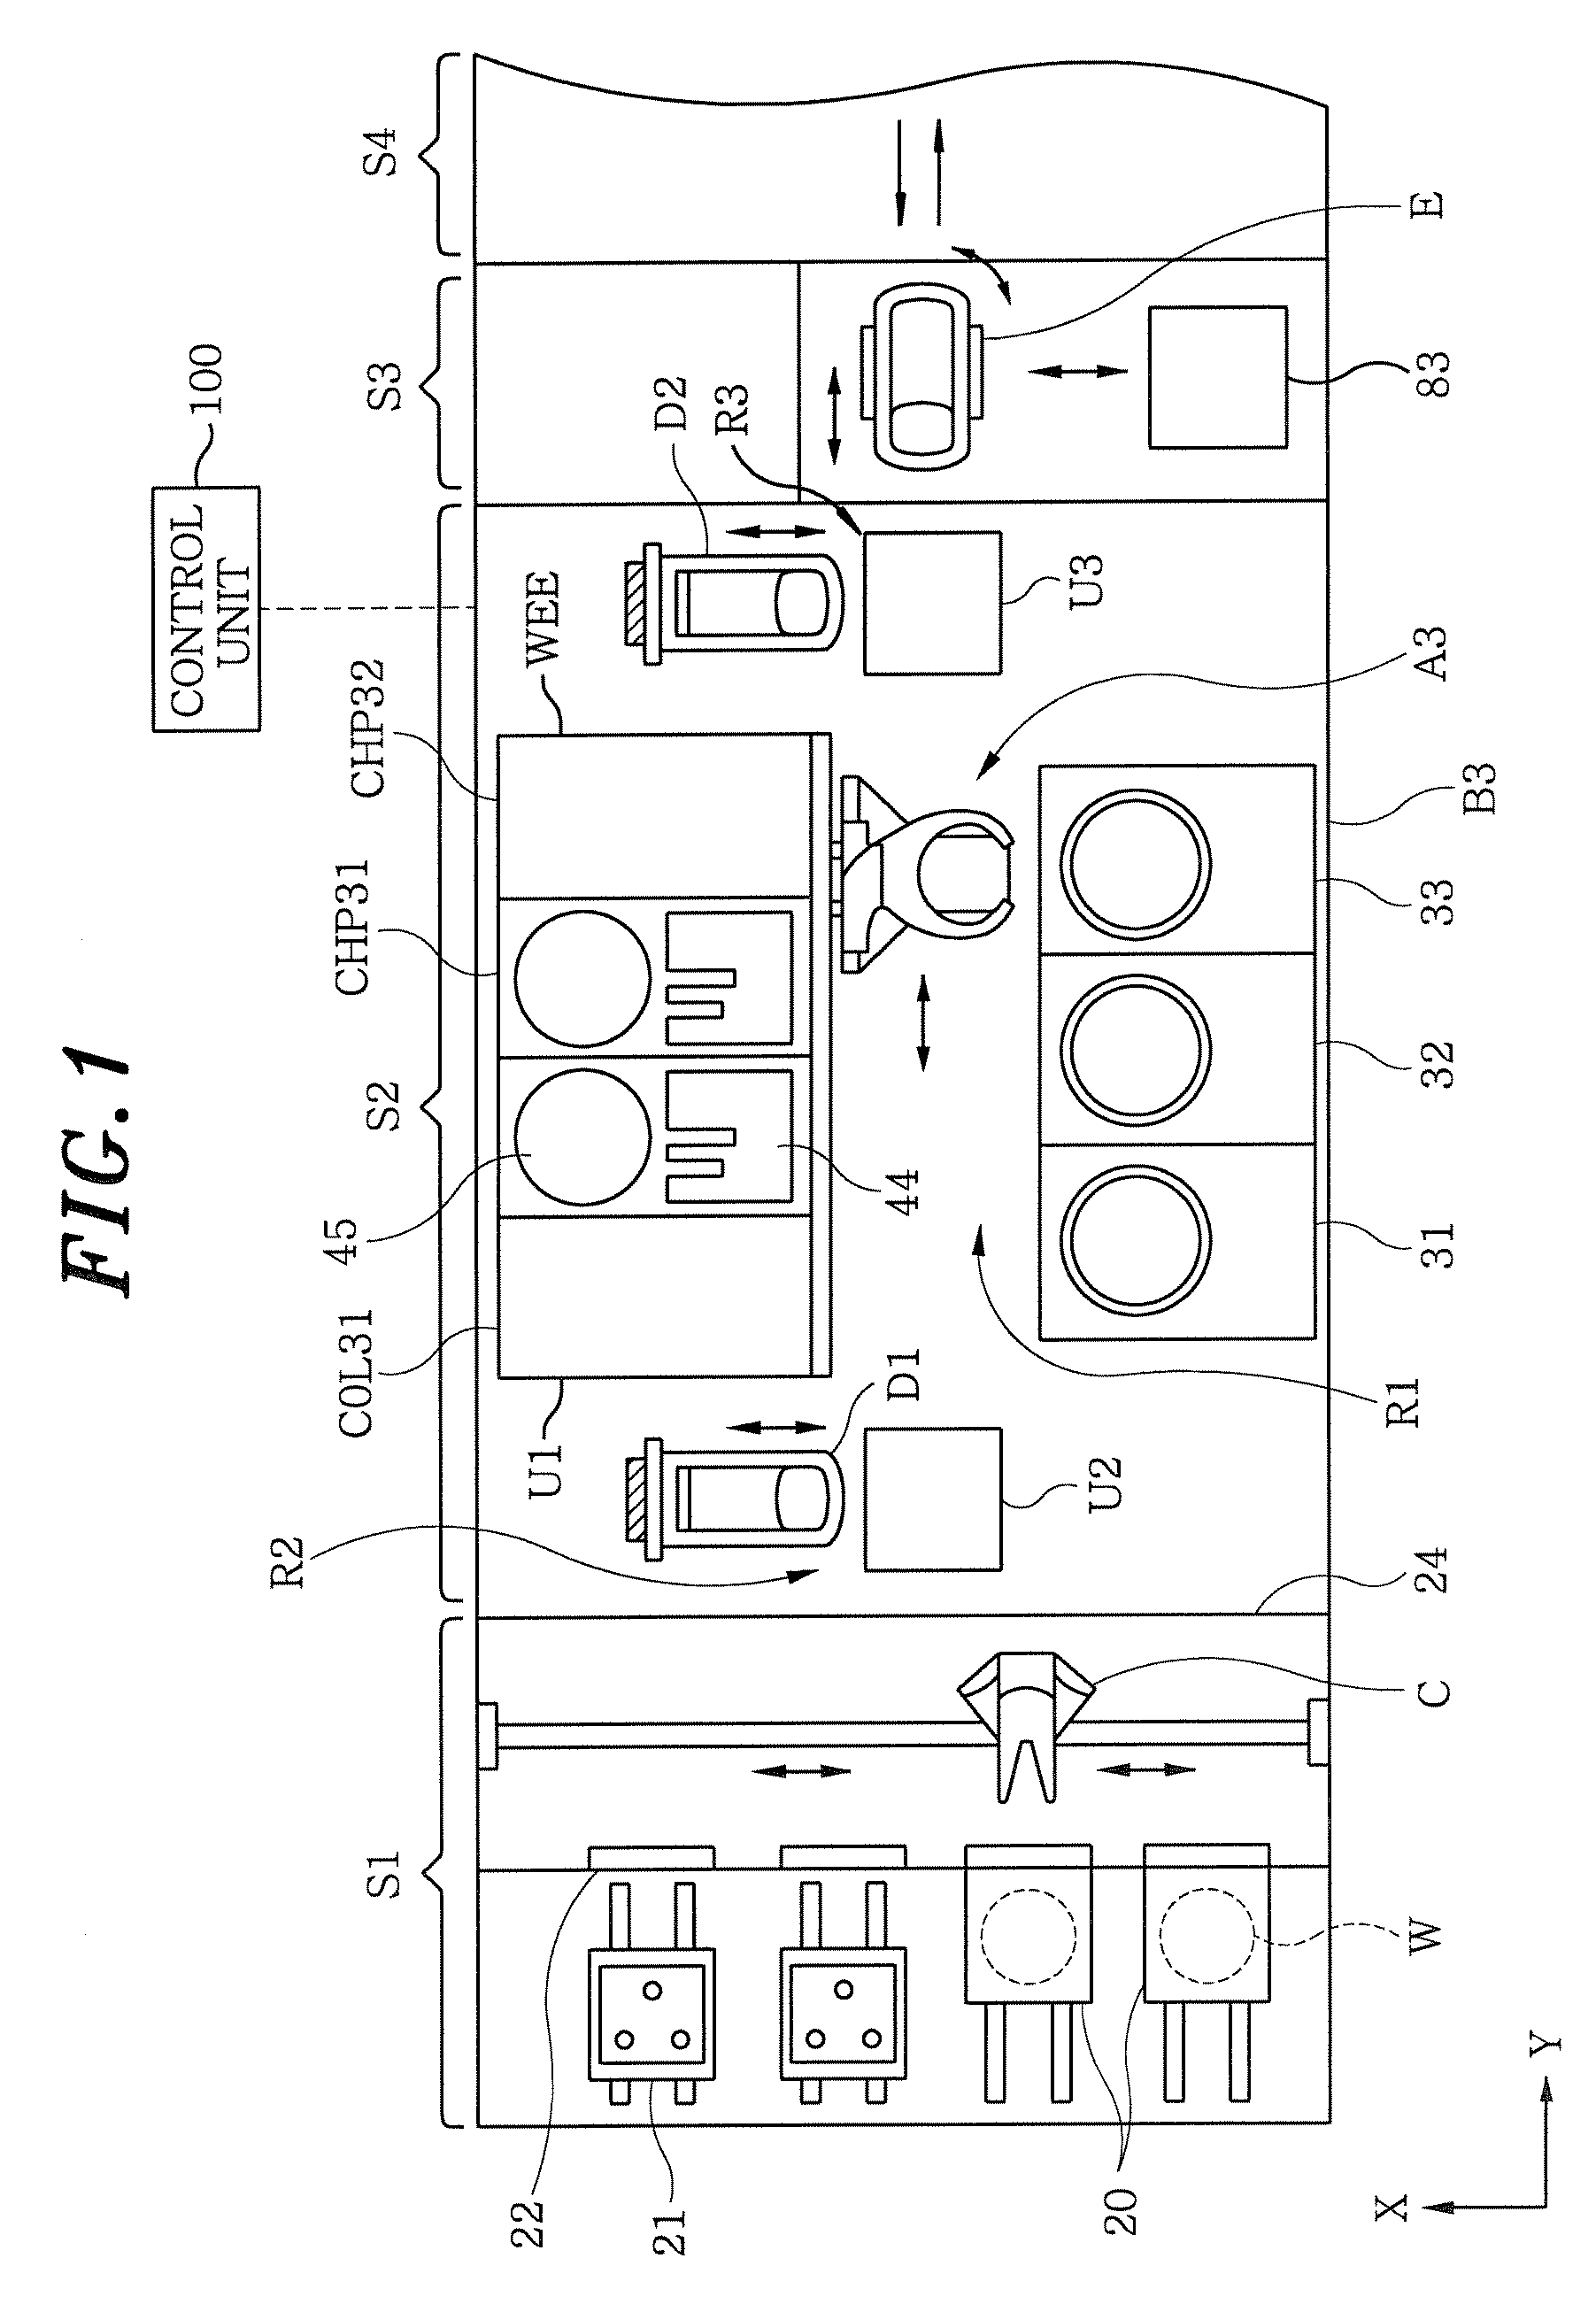 Coating/developing device and method